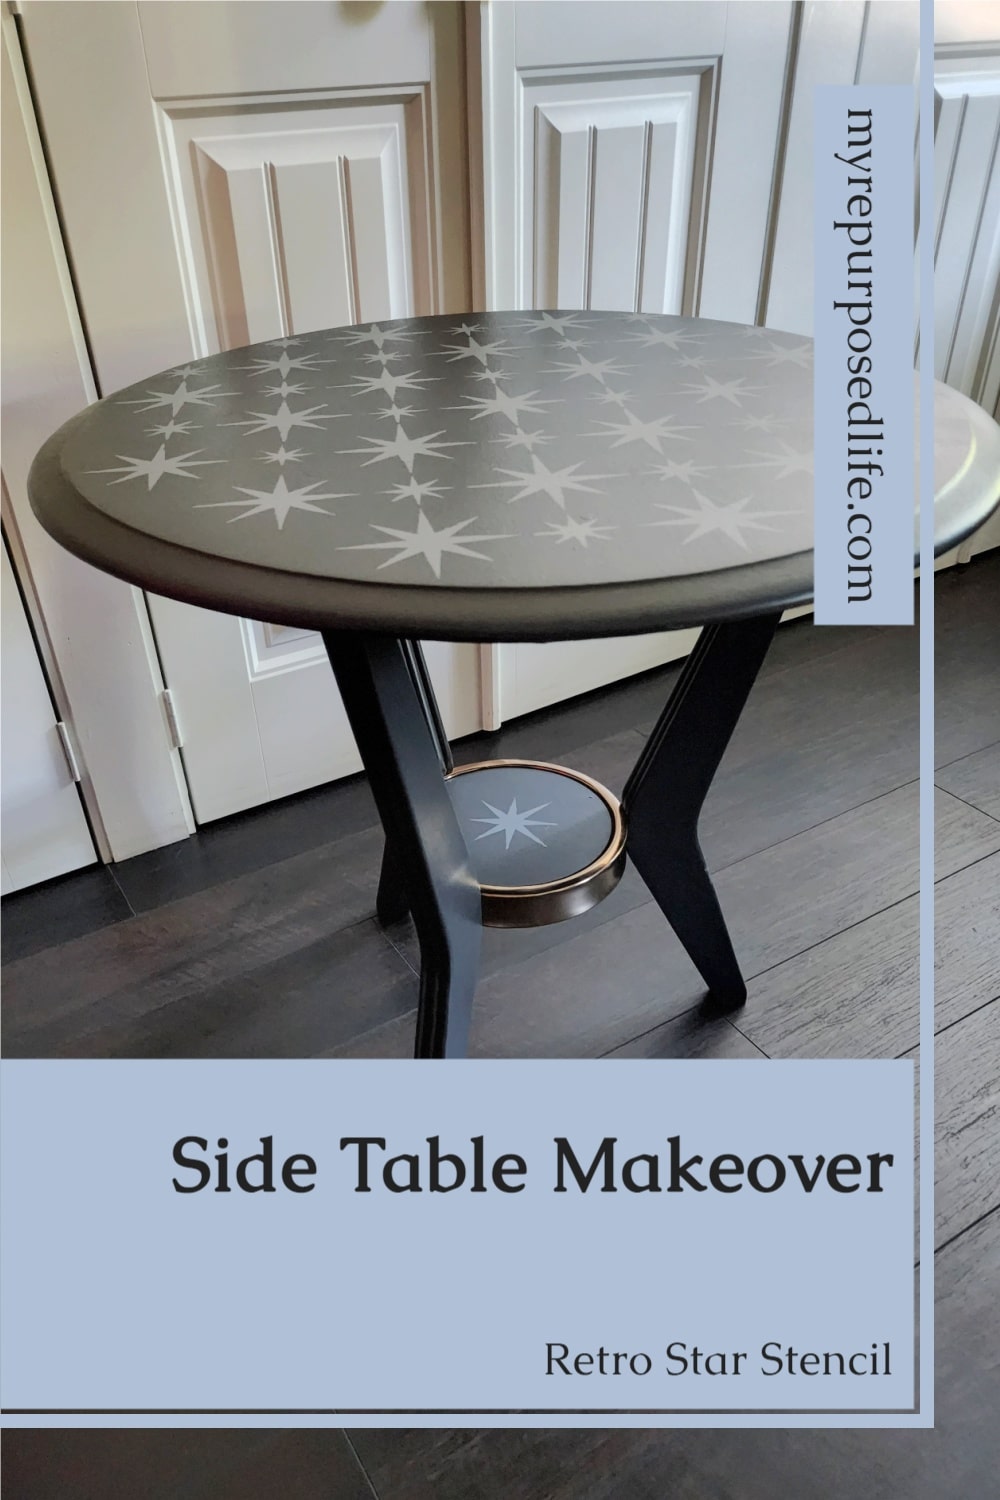 A table found on the roadside, gets a new lease on life with an old tabletop long forgotten. When you "marry" two pieces of furniture it just has to be a win/win, right? #MyRepurposedLife #repurpose #upcycle #table #roadkillrescue #retro via @repurposedlife